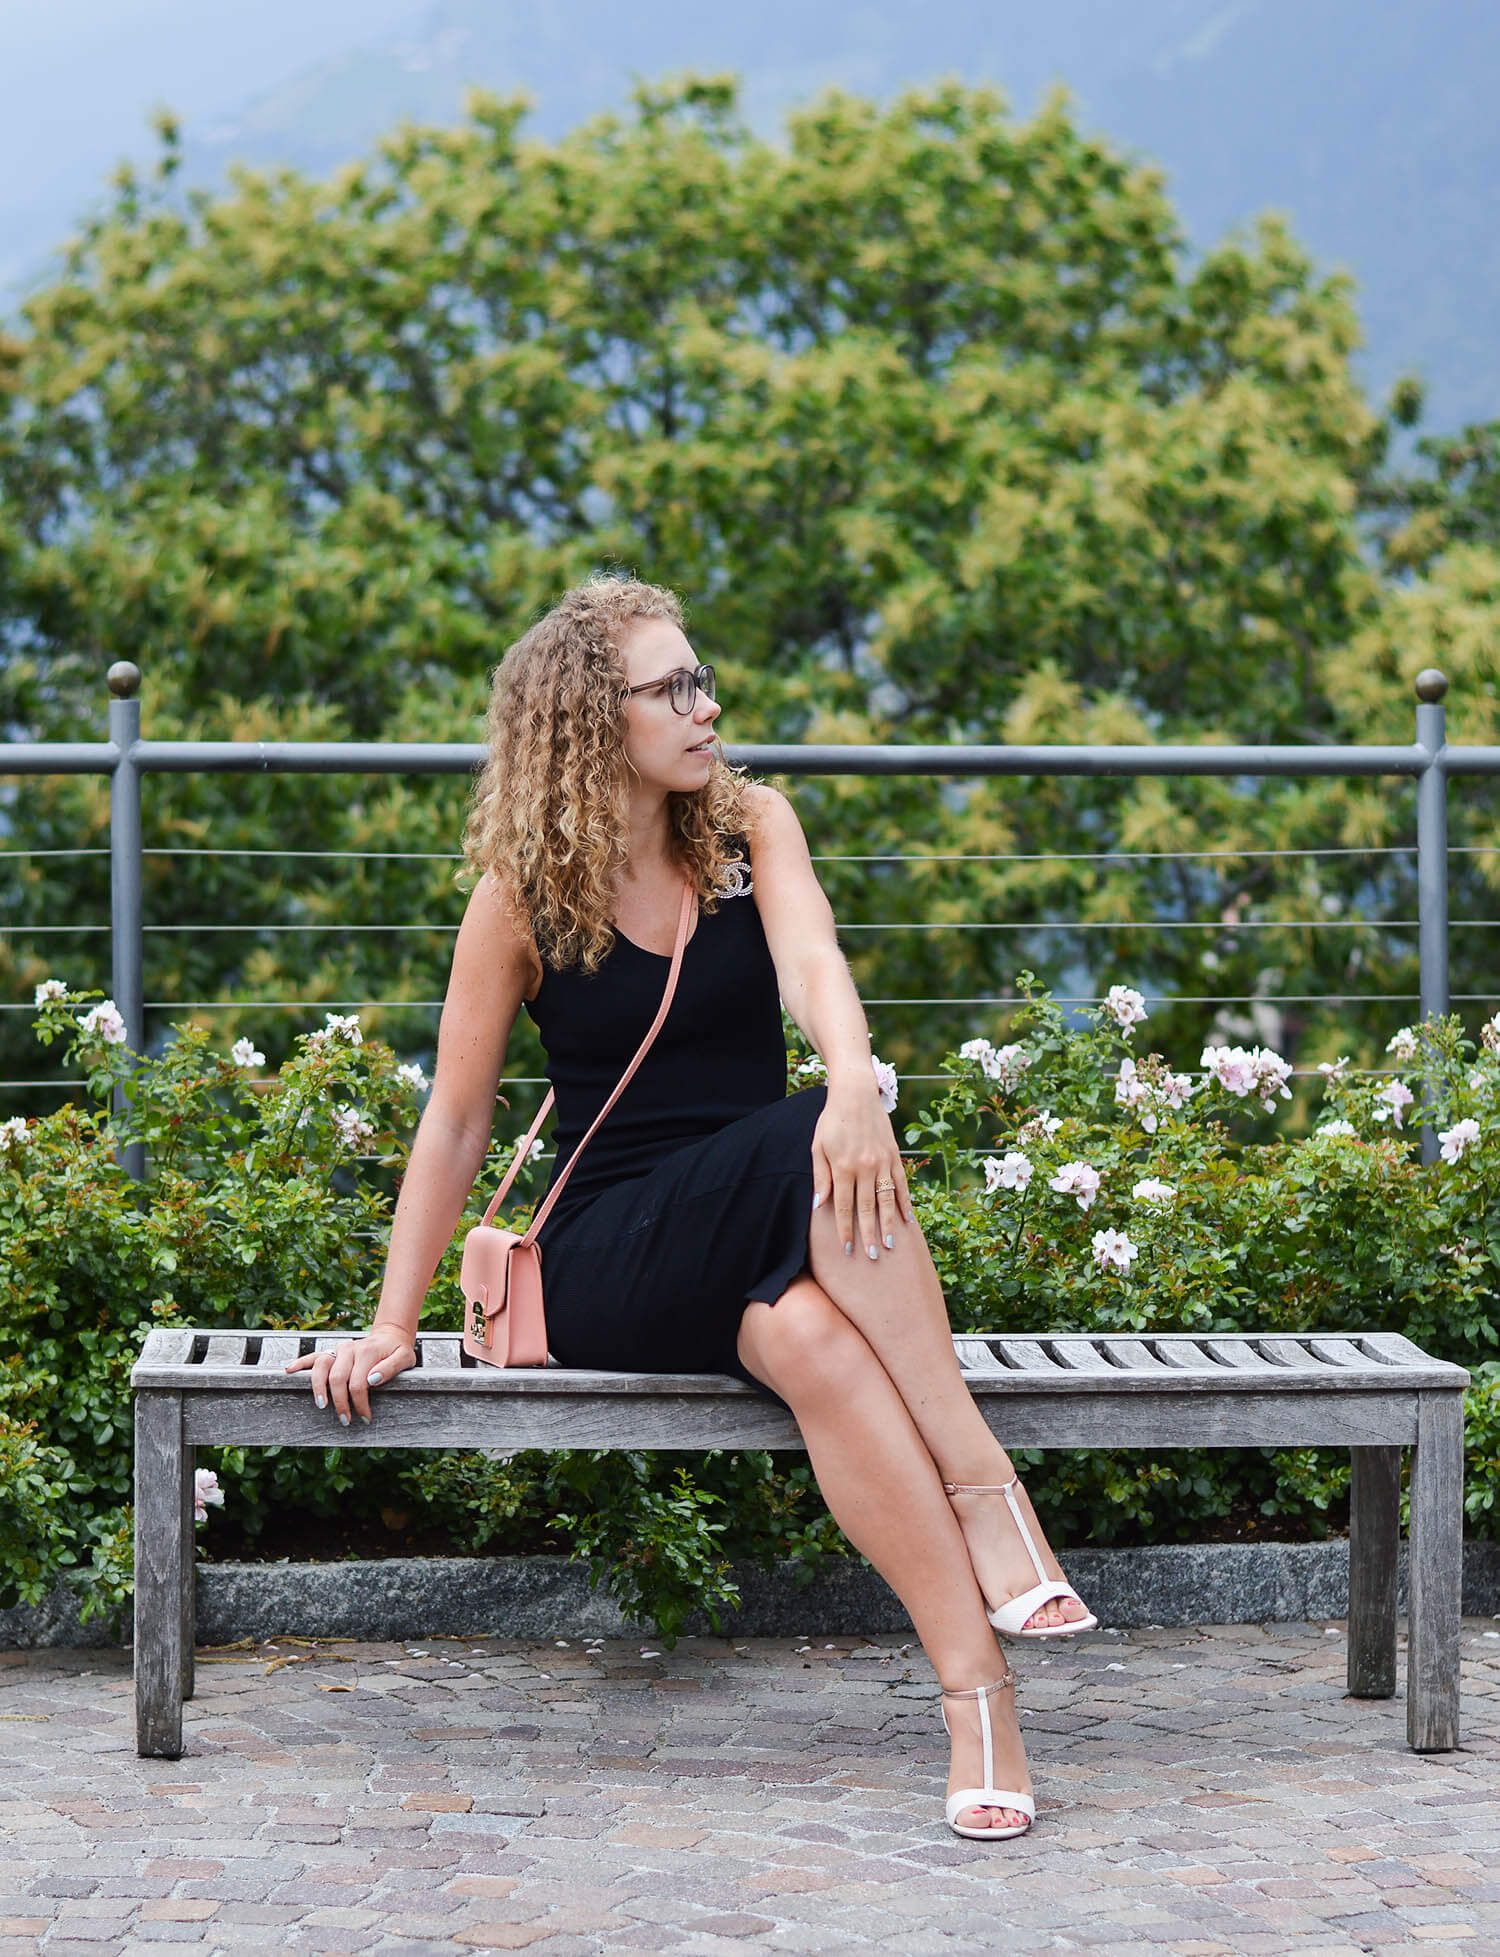 Kationette-fashionblog-nrw-Outfit-Little-Black-Dress-Fula-Chanel-South-Italy